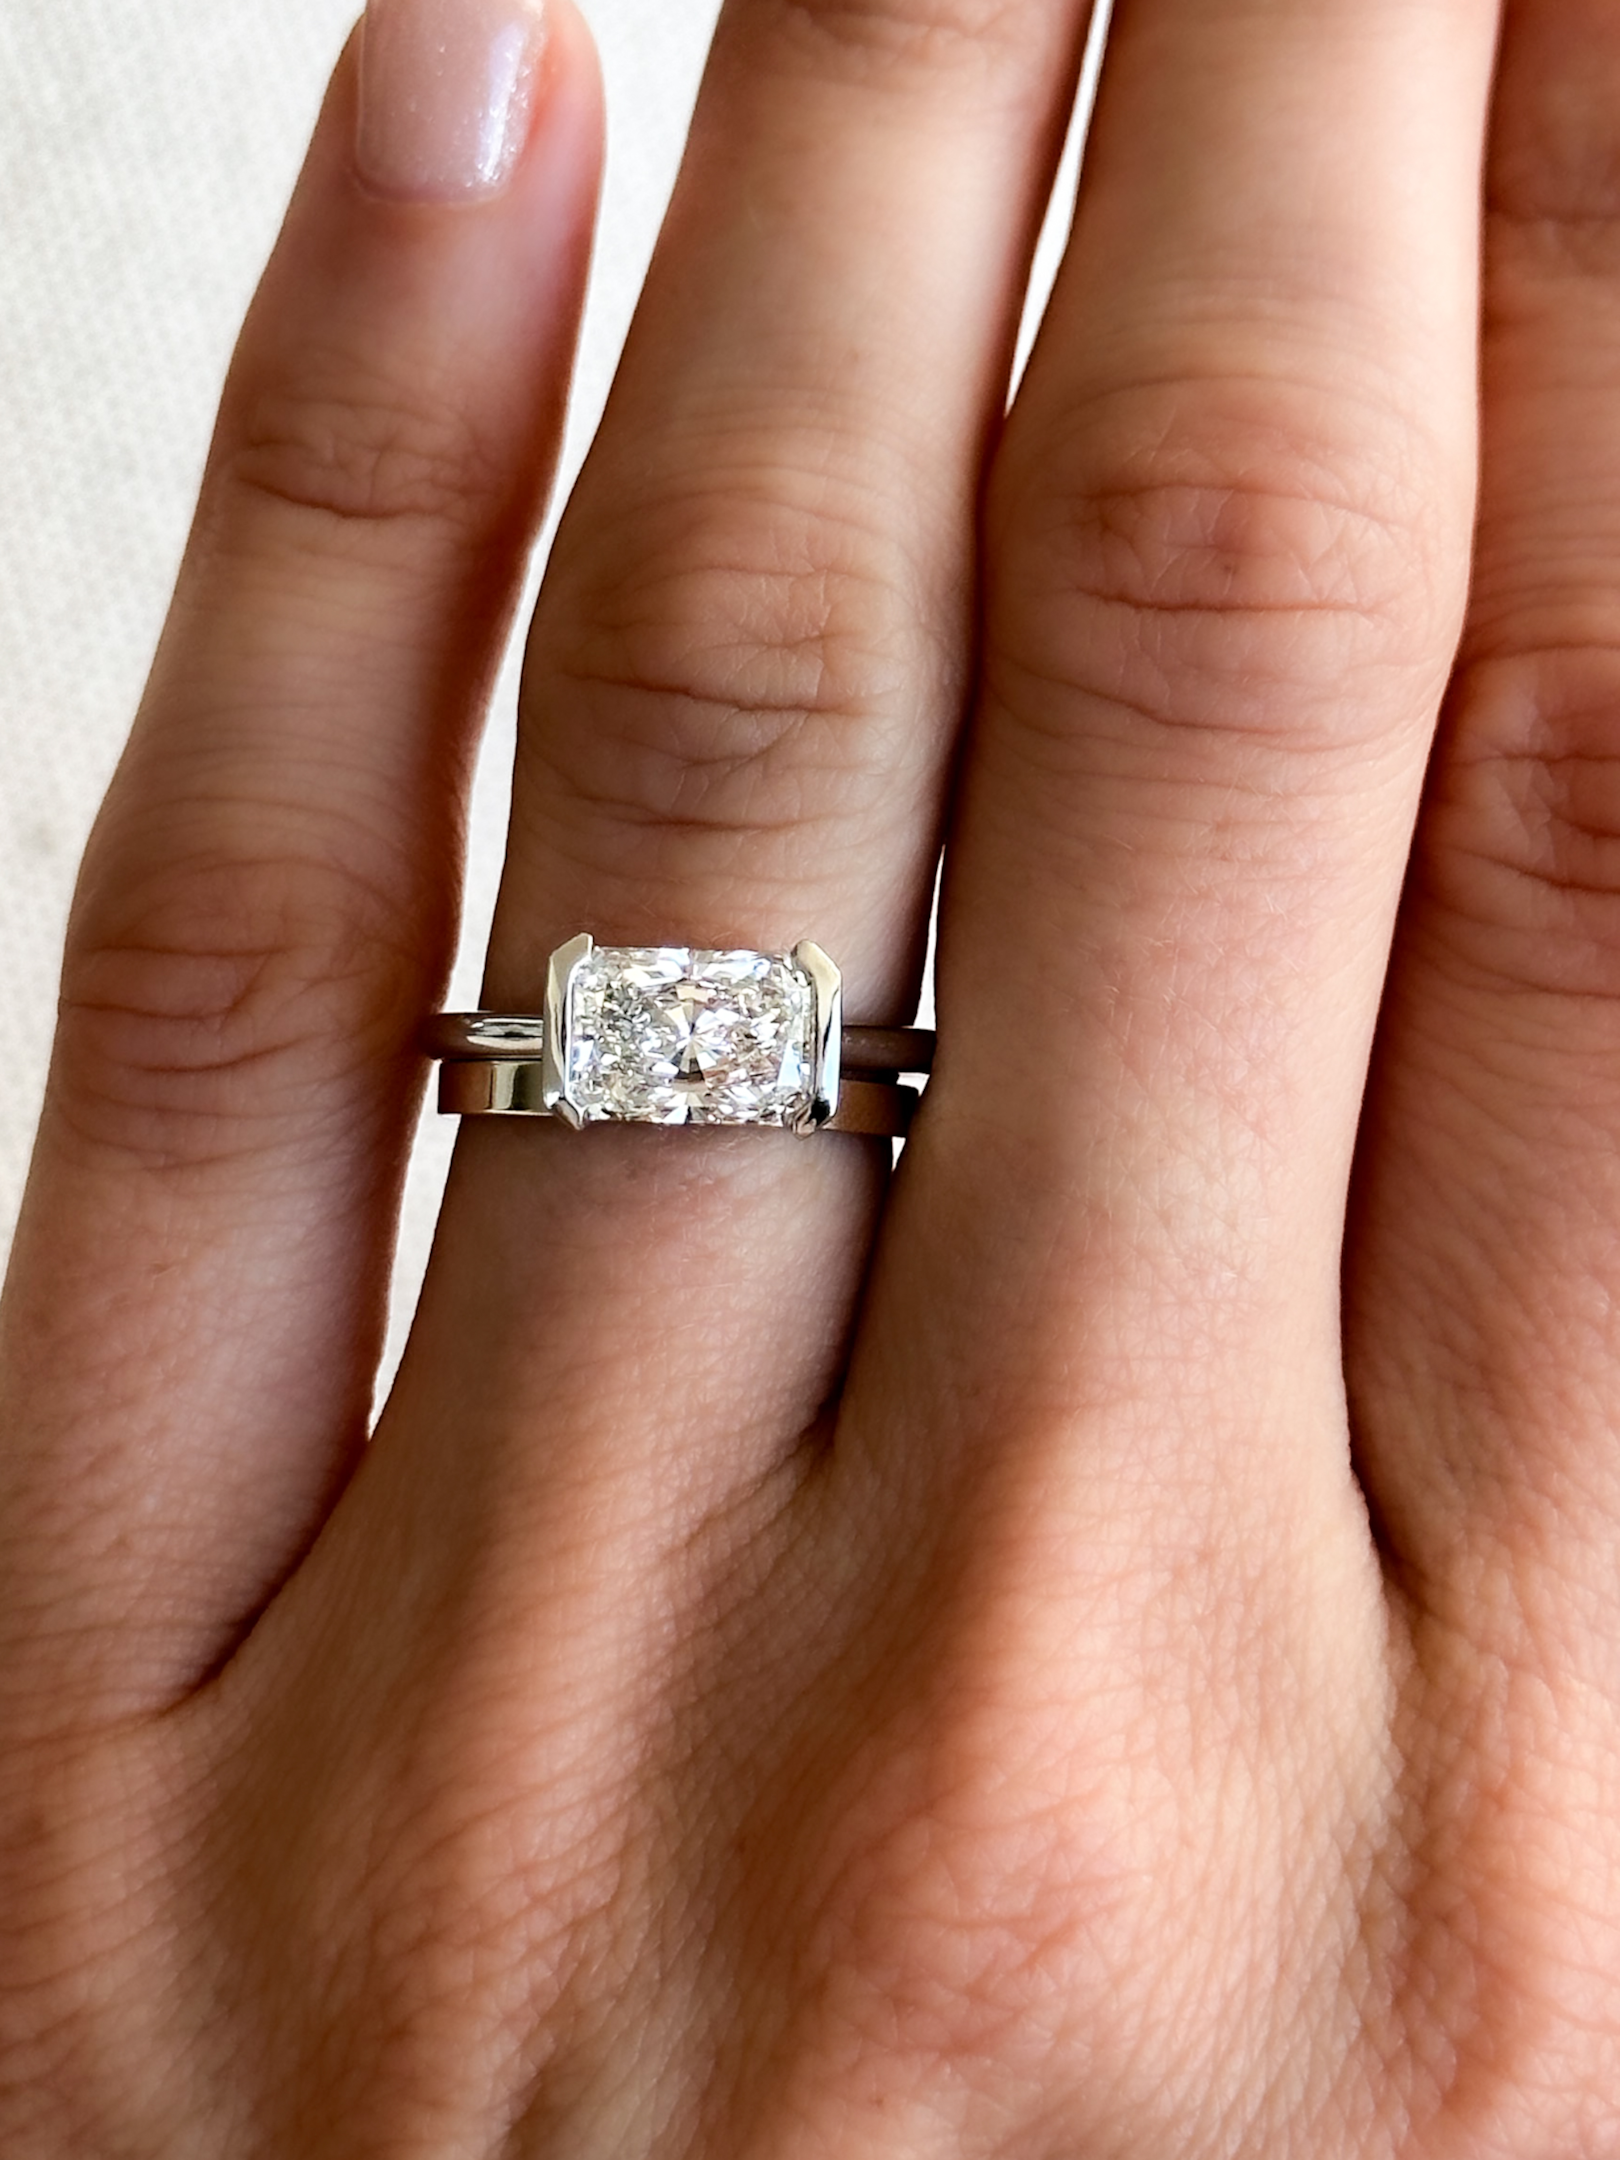 GOOSTONE East West Half Bezel Solitaire Engagement Ring With Elongated Radiant Cut Diamond